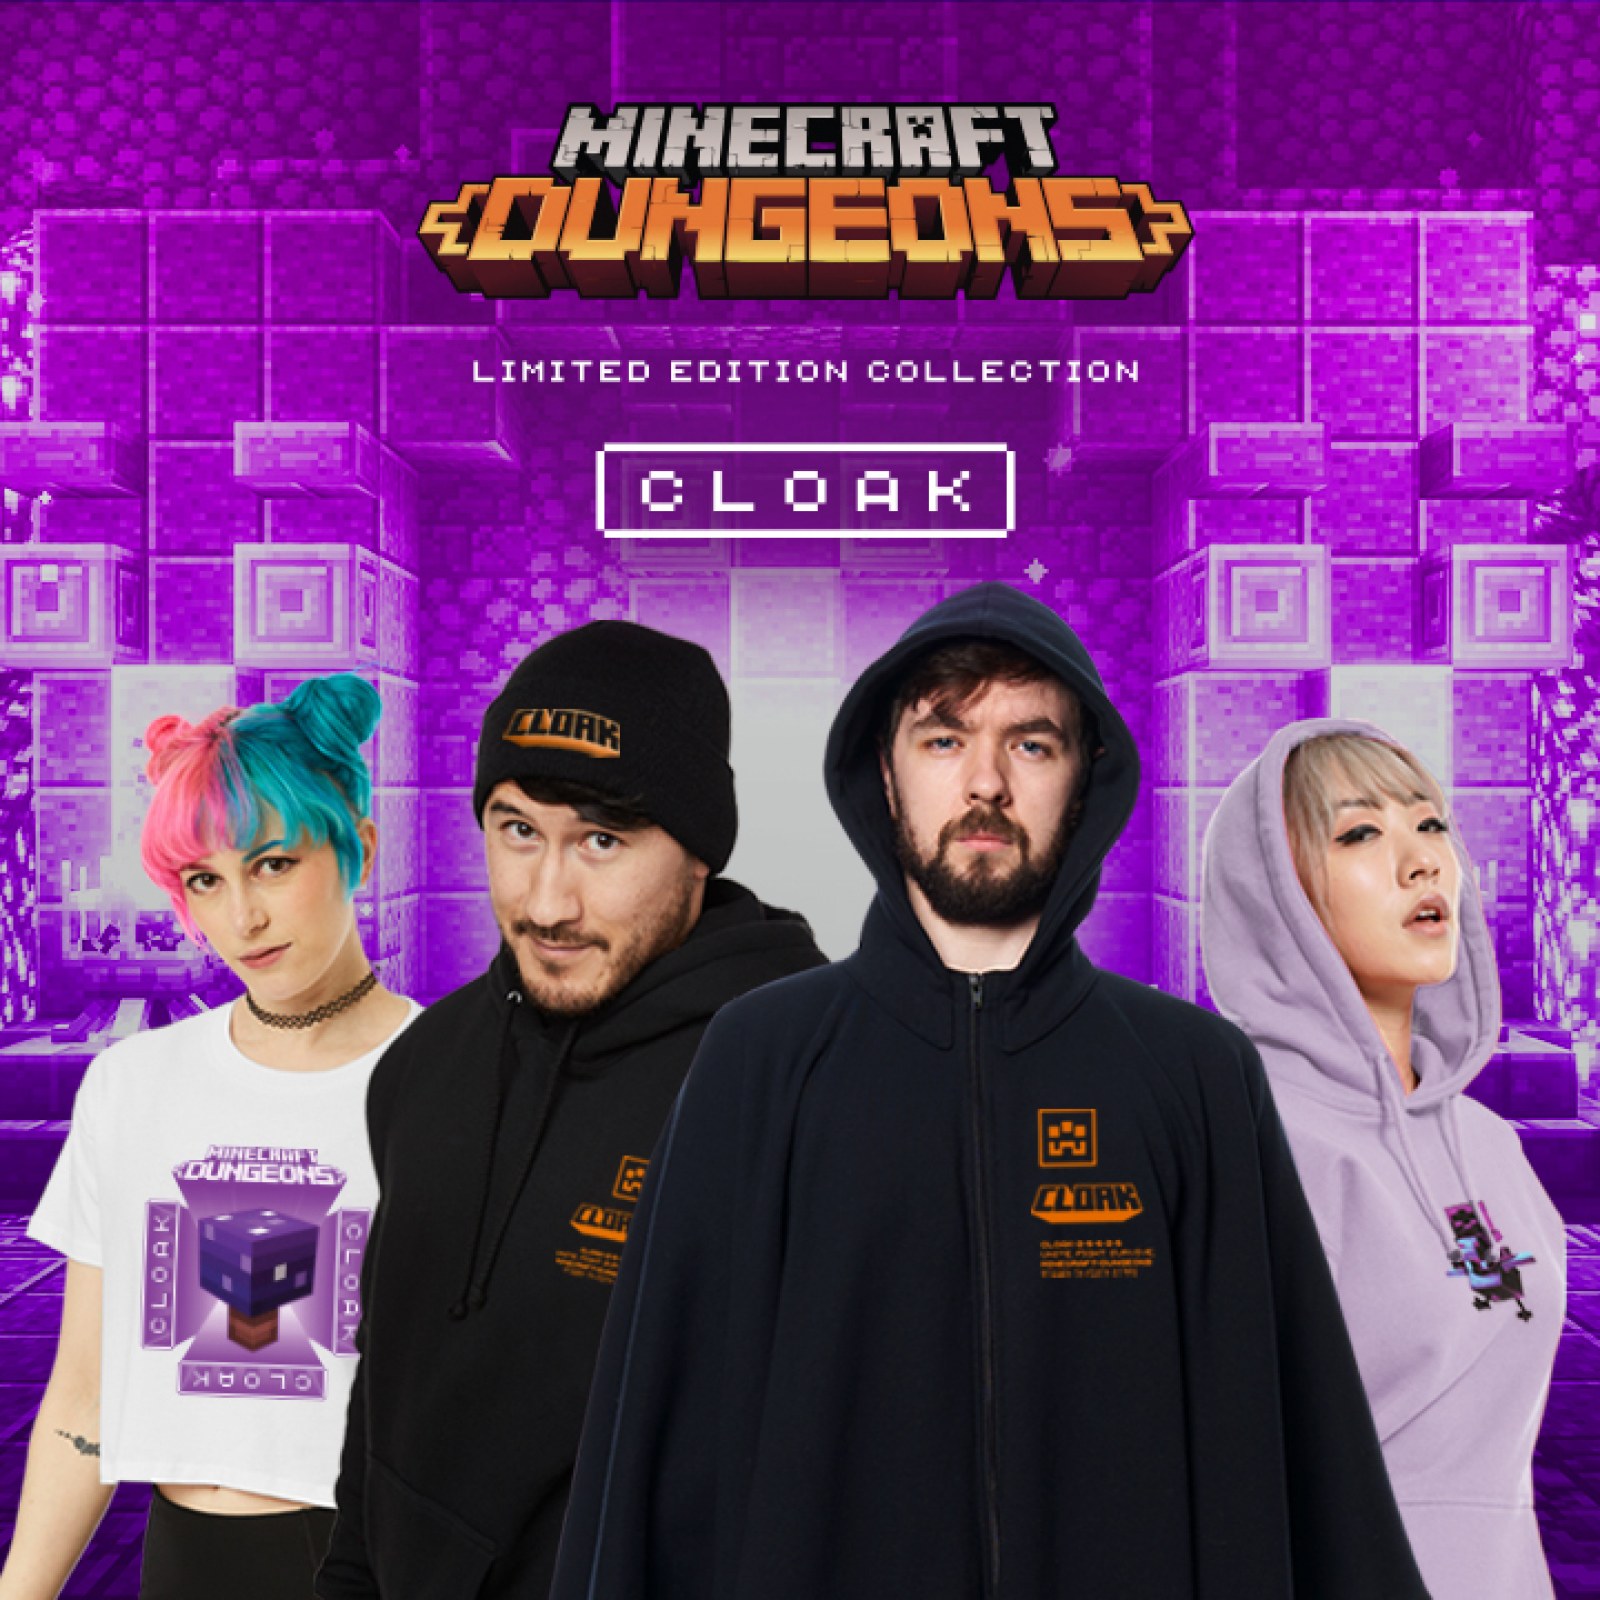 Cloak Clothing Announces Their New Minecraft Dungeons Line With